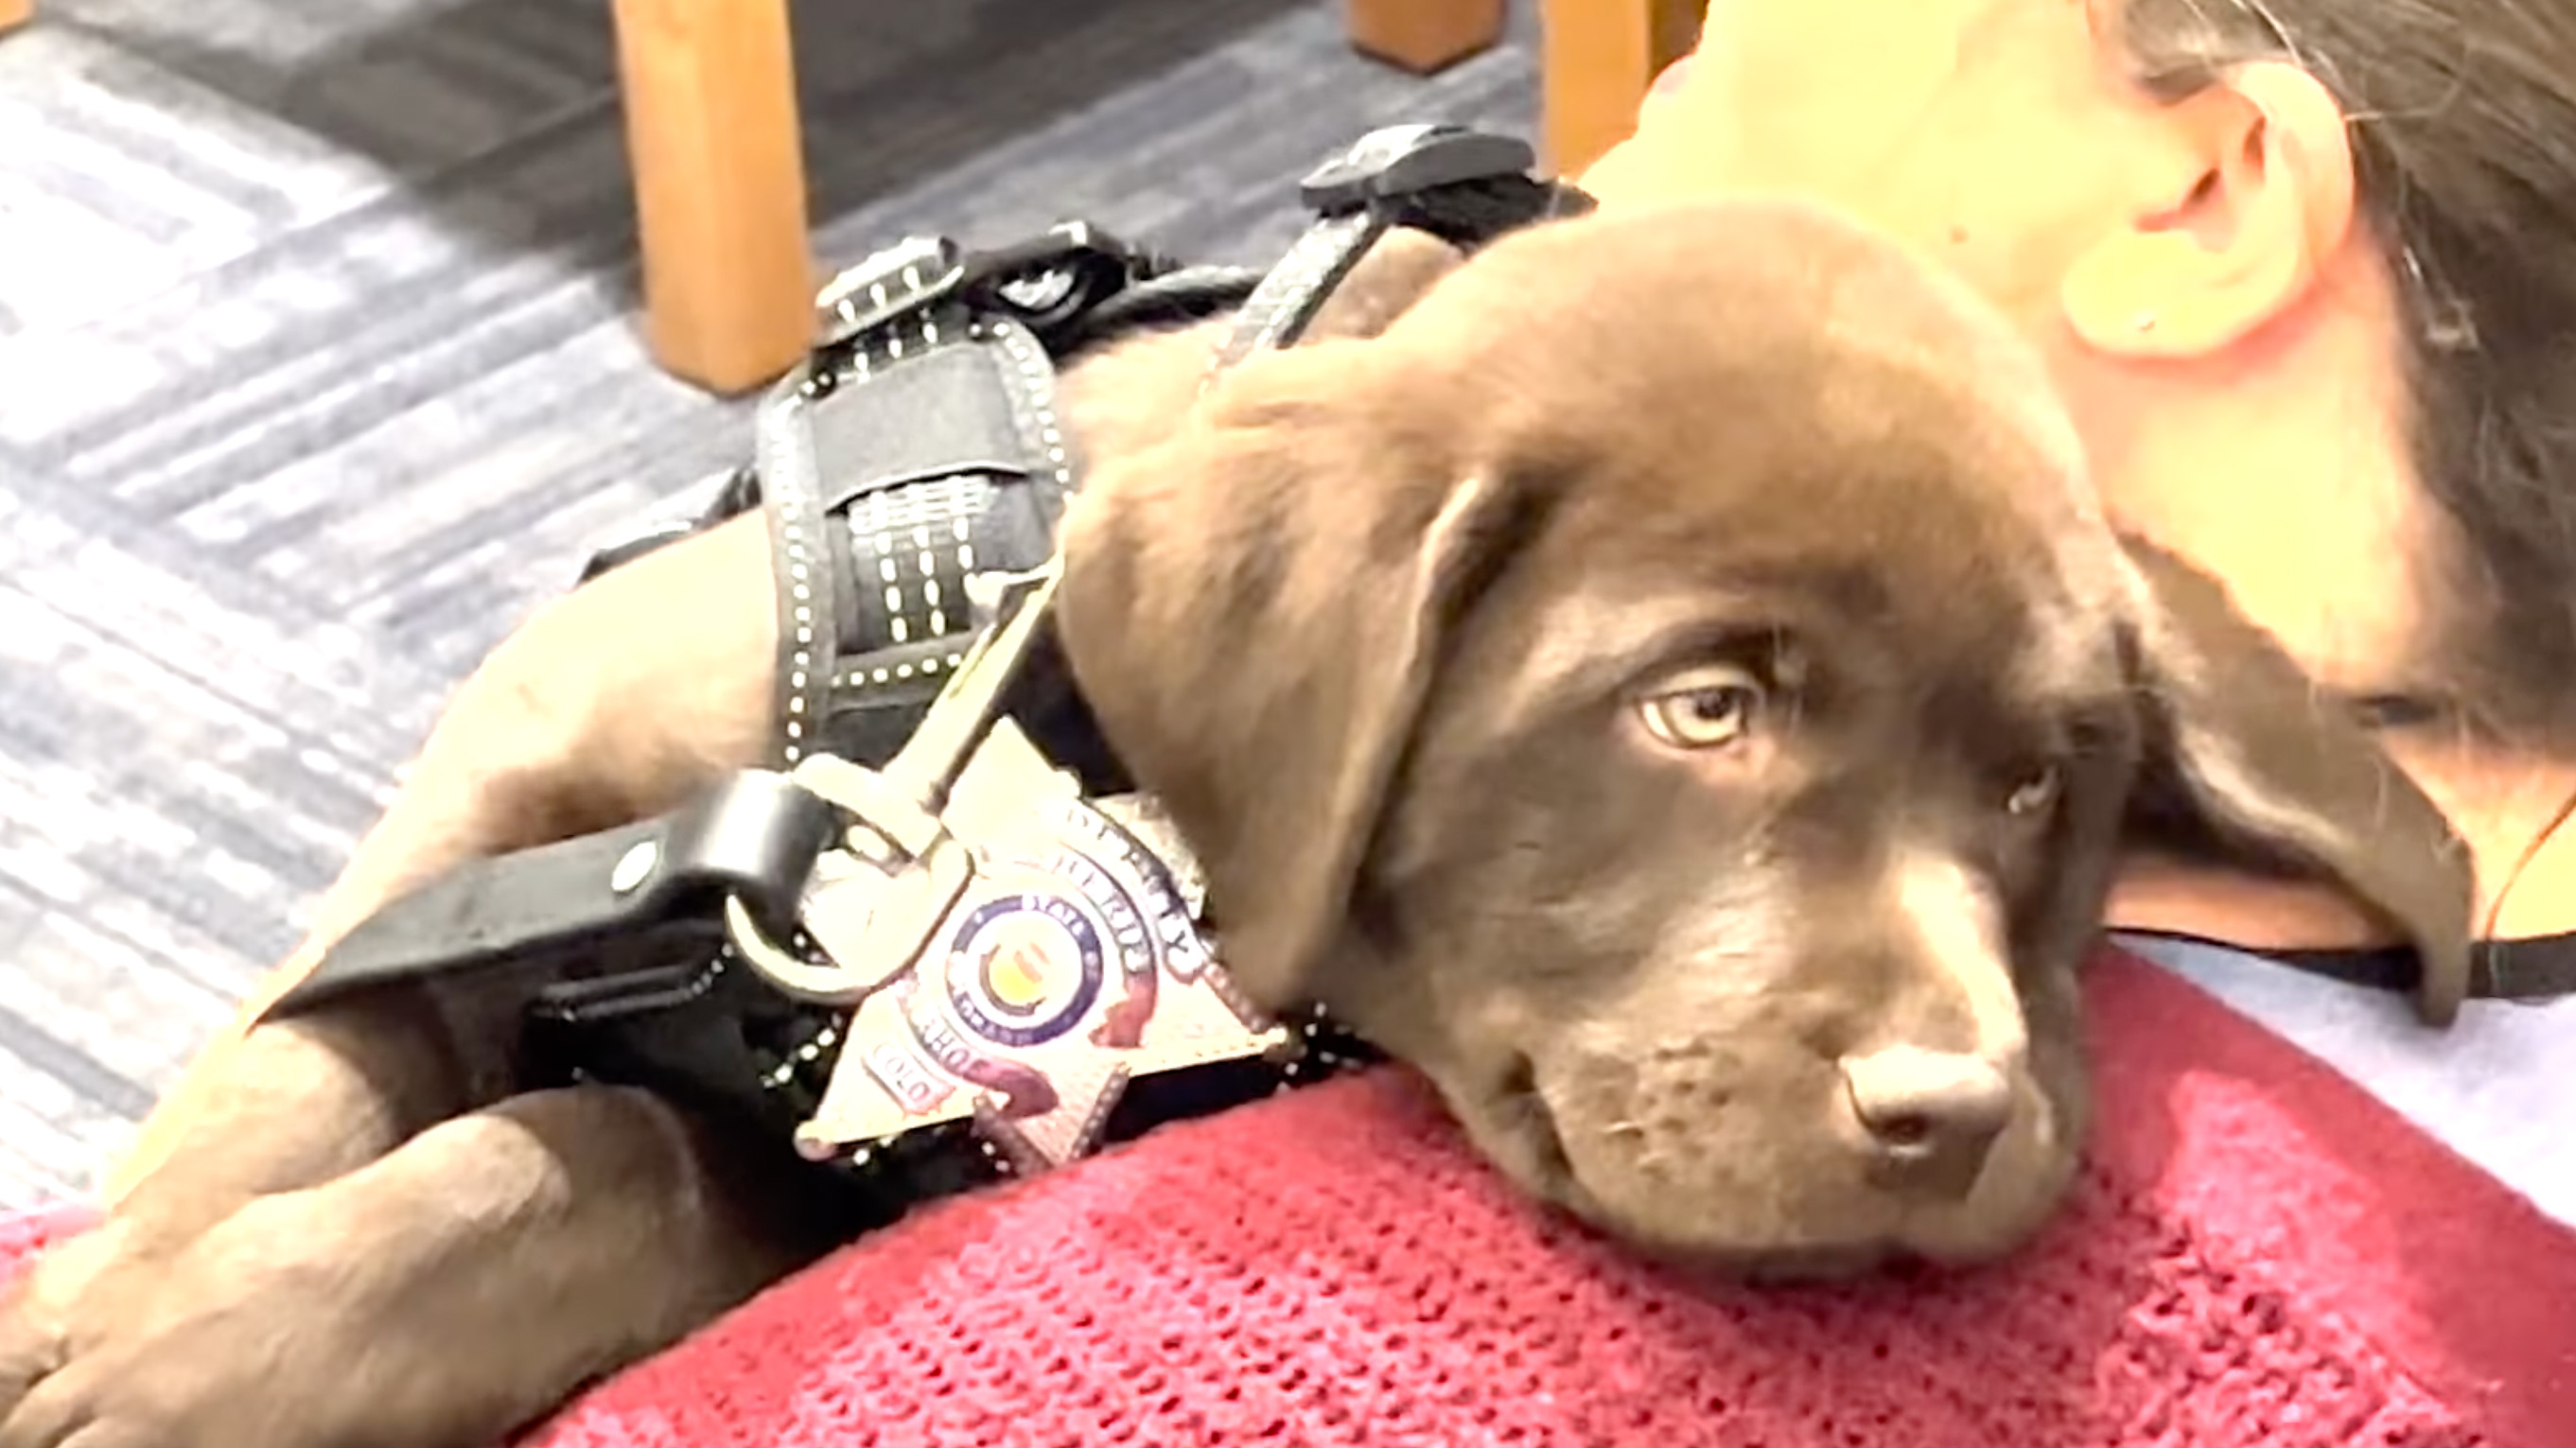 K9 Puppy Melts Hearts By Dozing Off During Swearing-In Ceremony